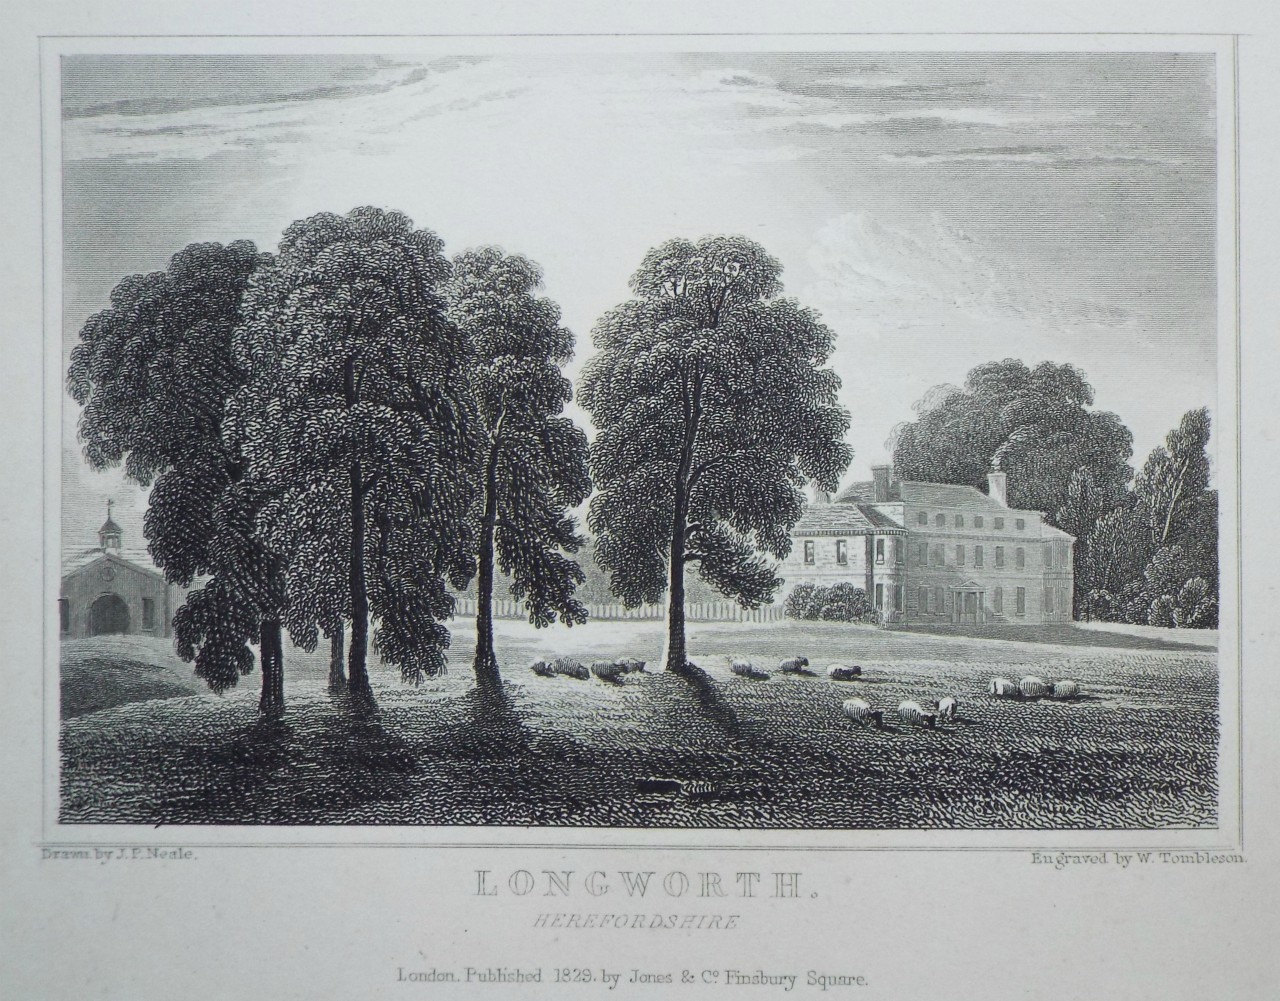 Print - Longworth. Herefordshire. - Tombleson